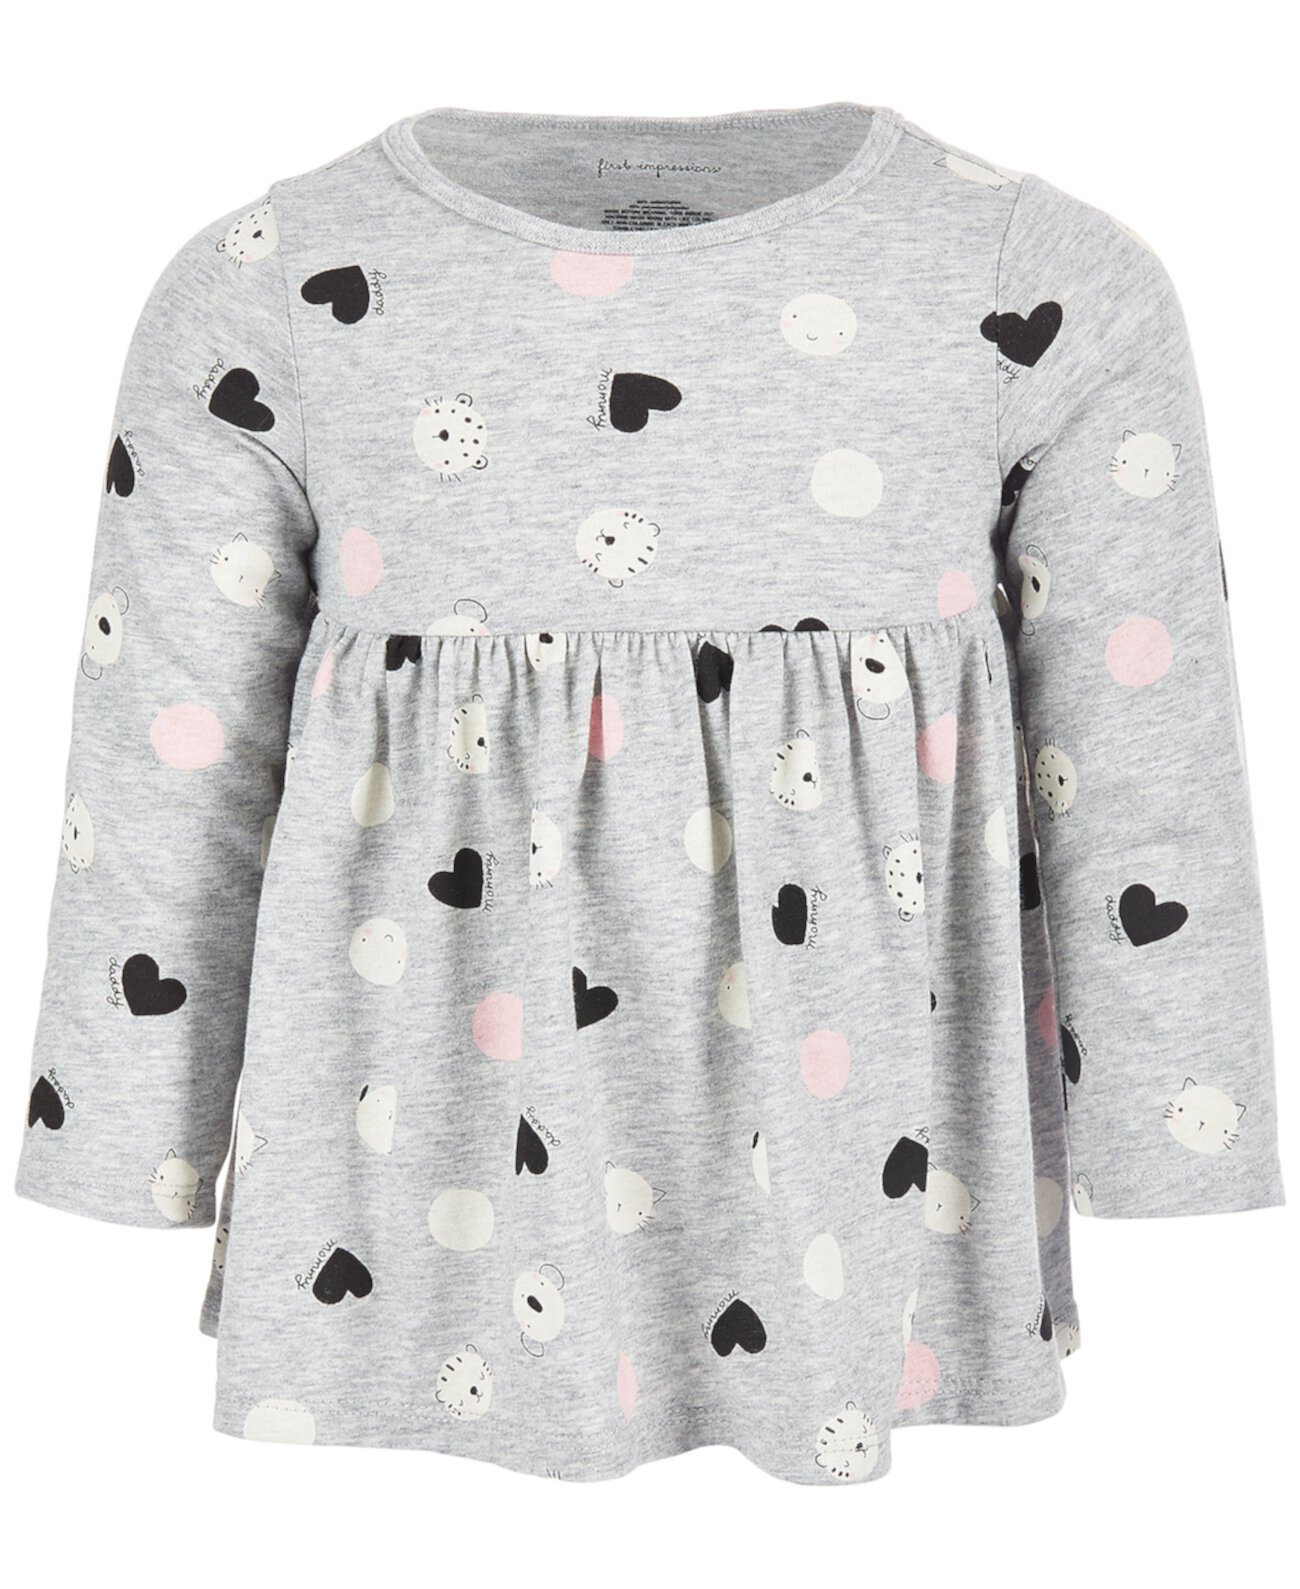 Toddler Girls Long Sleeve Animal Dot Tunic, Created for Macy's First Impressions